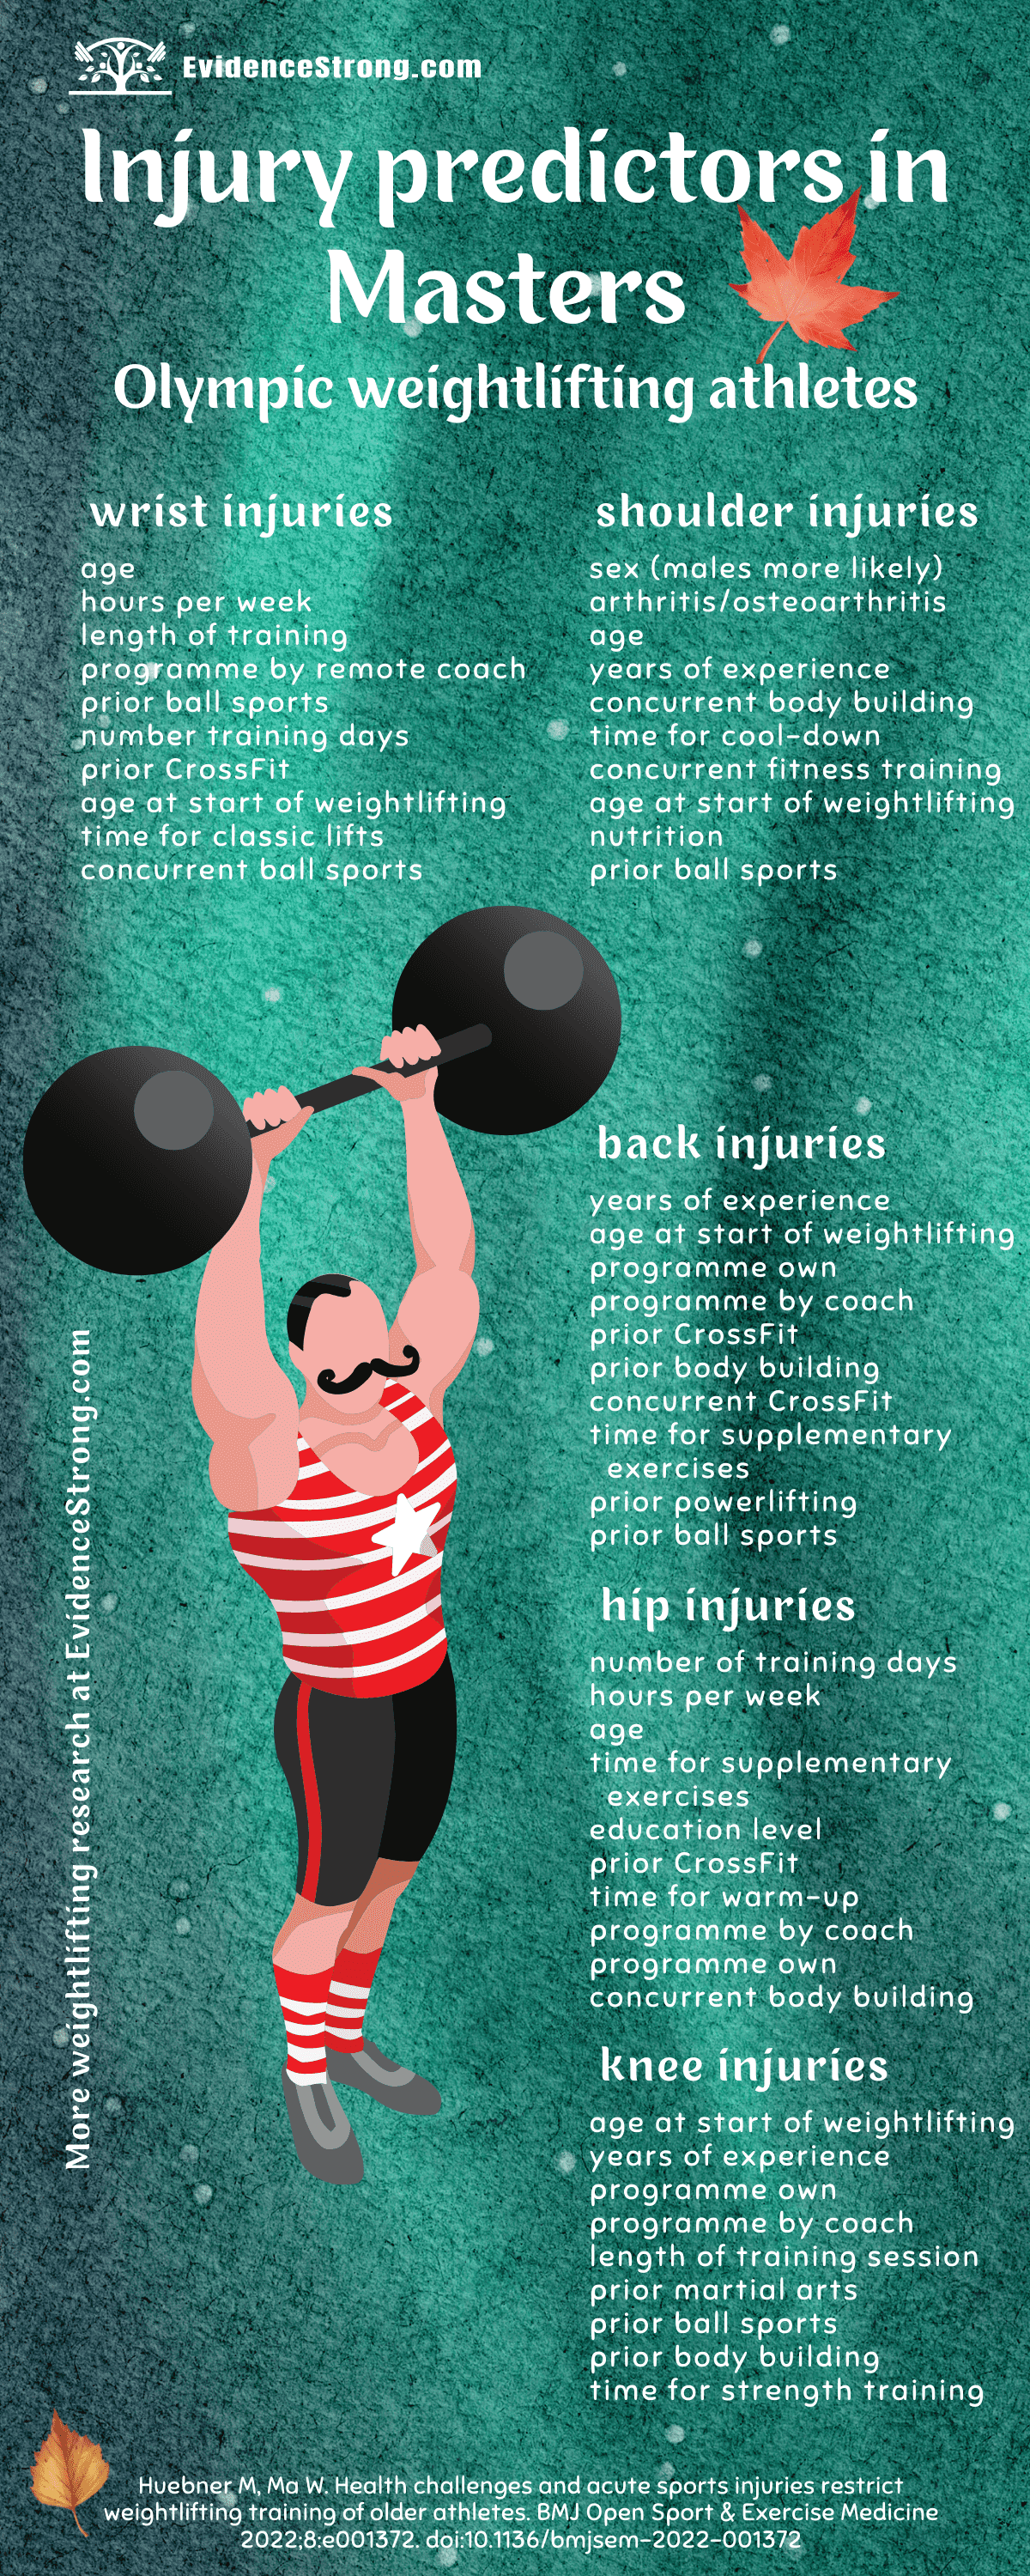 Injury predictors in masters Olympic weightlifters - infographic